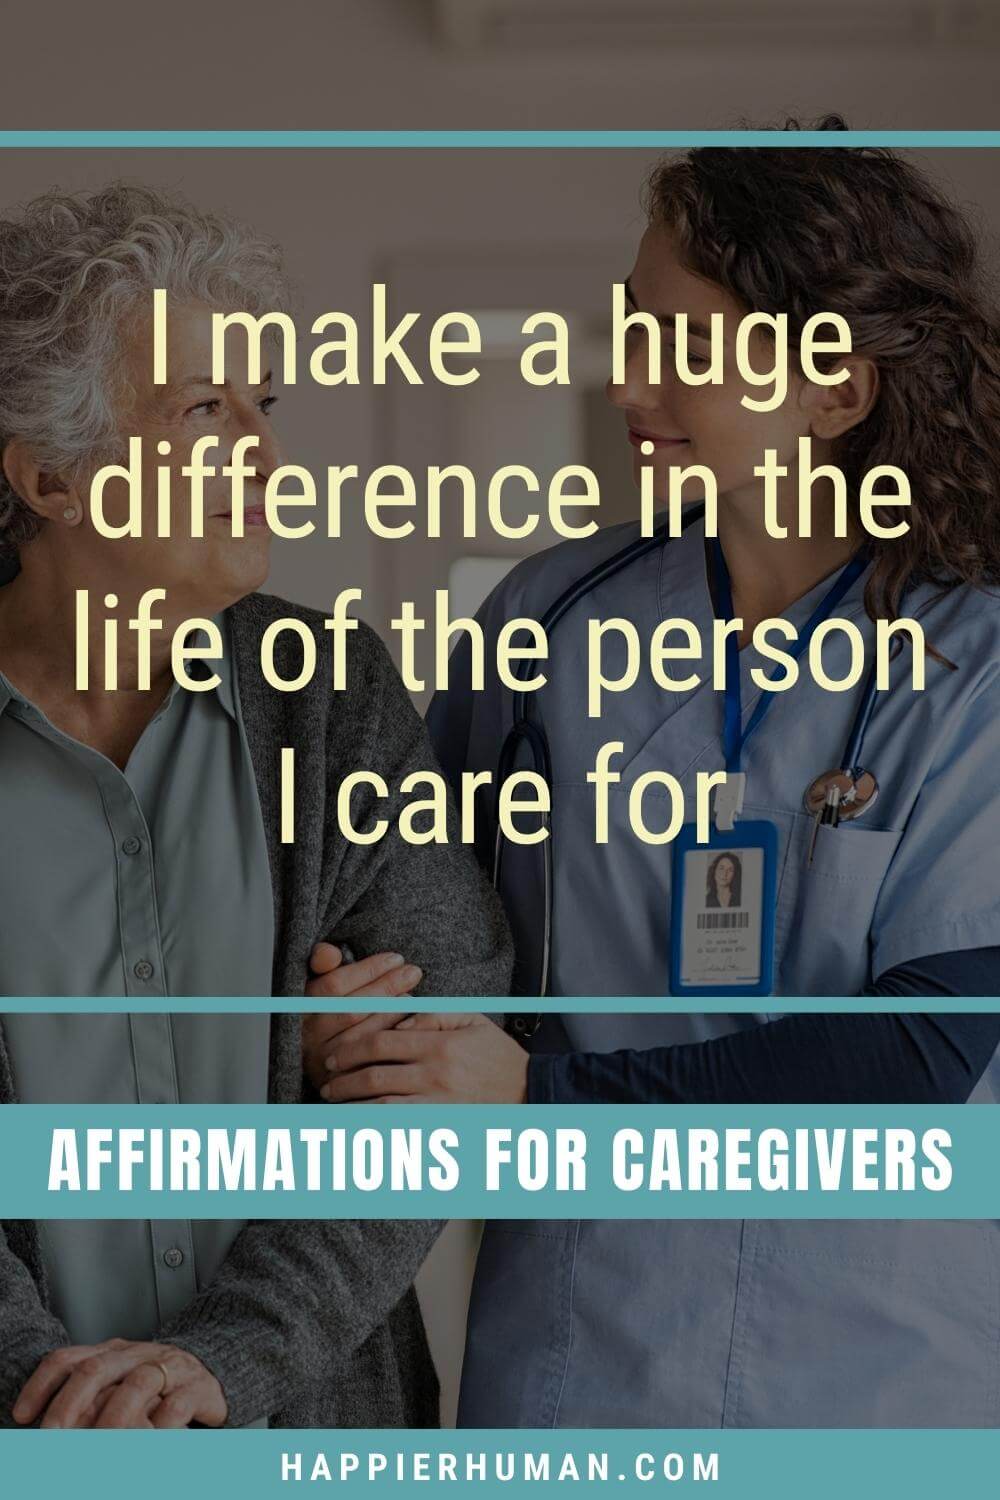 Affirmations For Caregivers - I make a huge difference in the life of the person I care for | affirmation examples | household affirmations | affirmation meaning